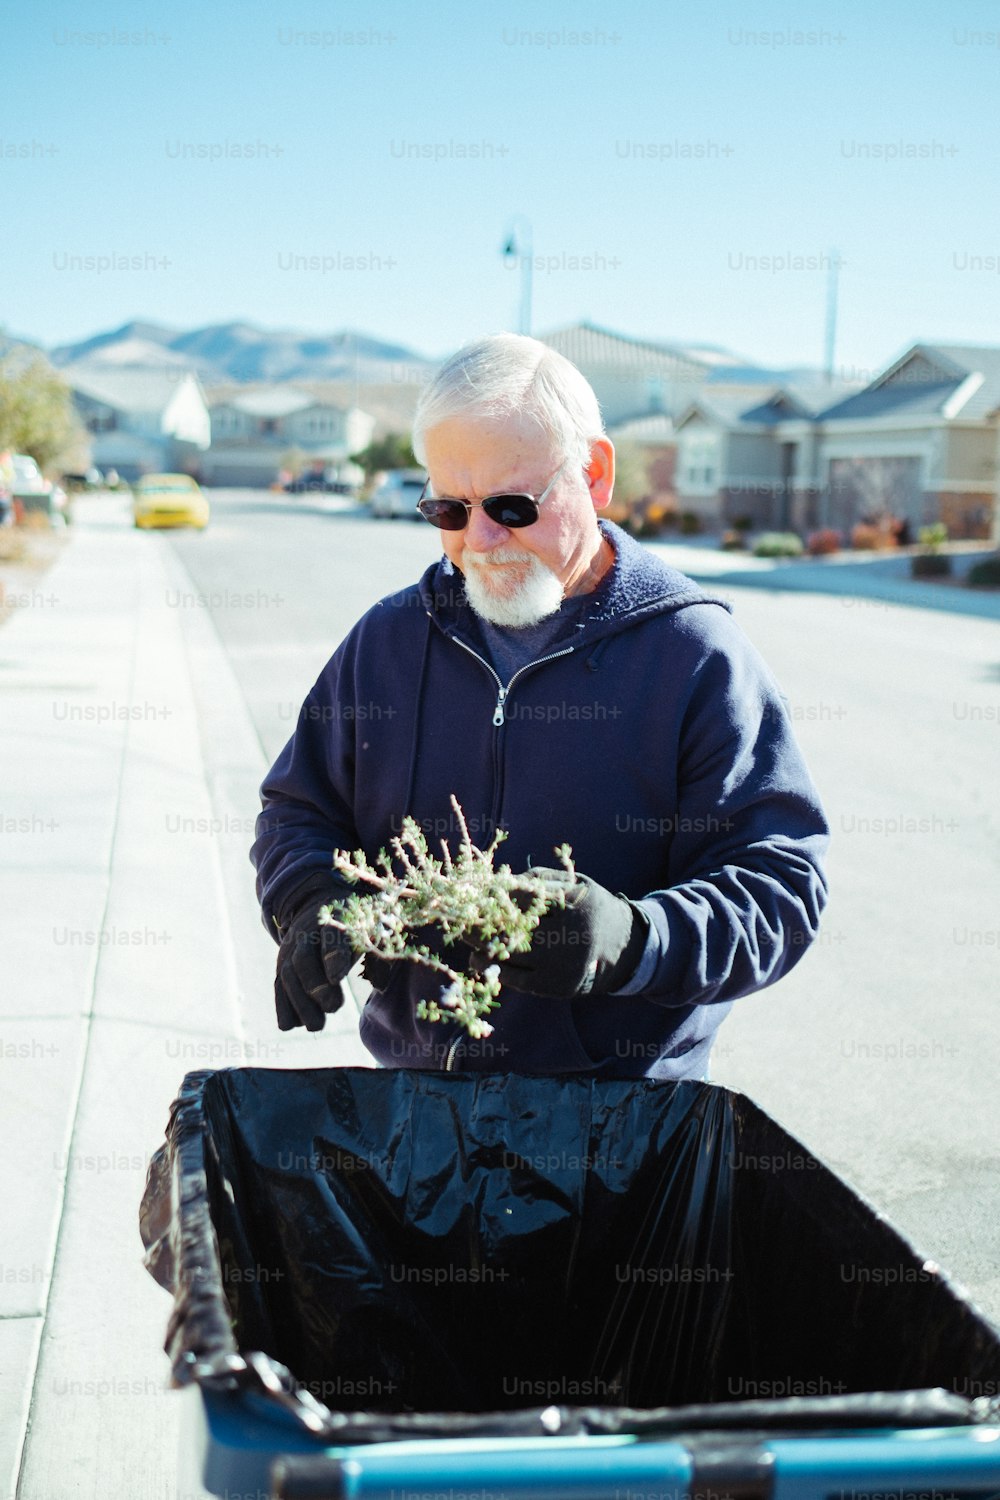 a man with a beard and sunglasses is picking up a plant from a trash can